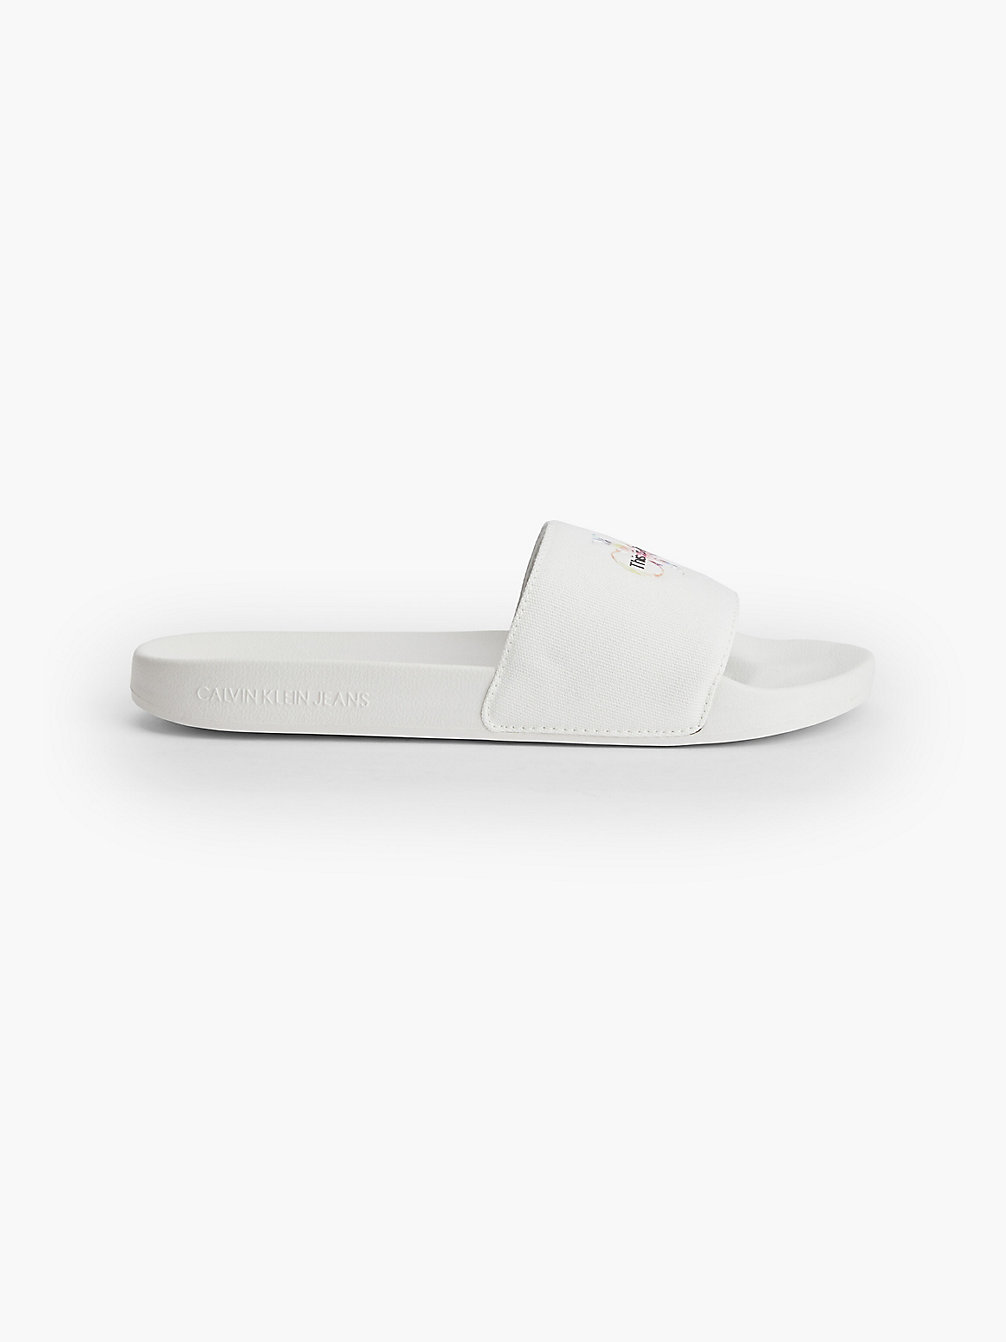 BRIGHT WHITE Recycled Canvas Sliders - Pride undefined men Calvin Klein